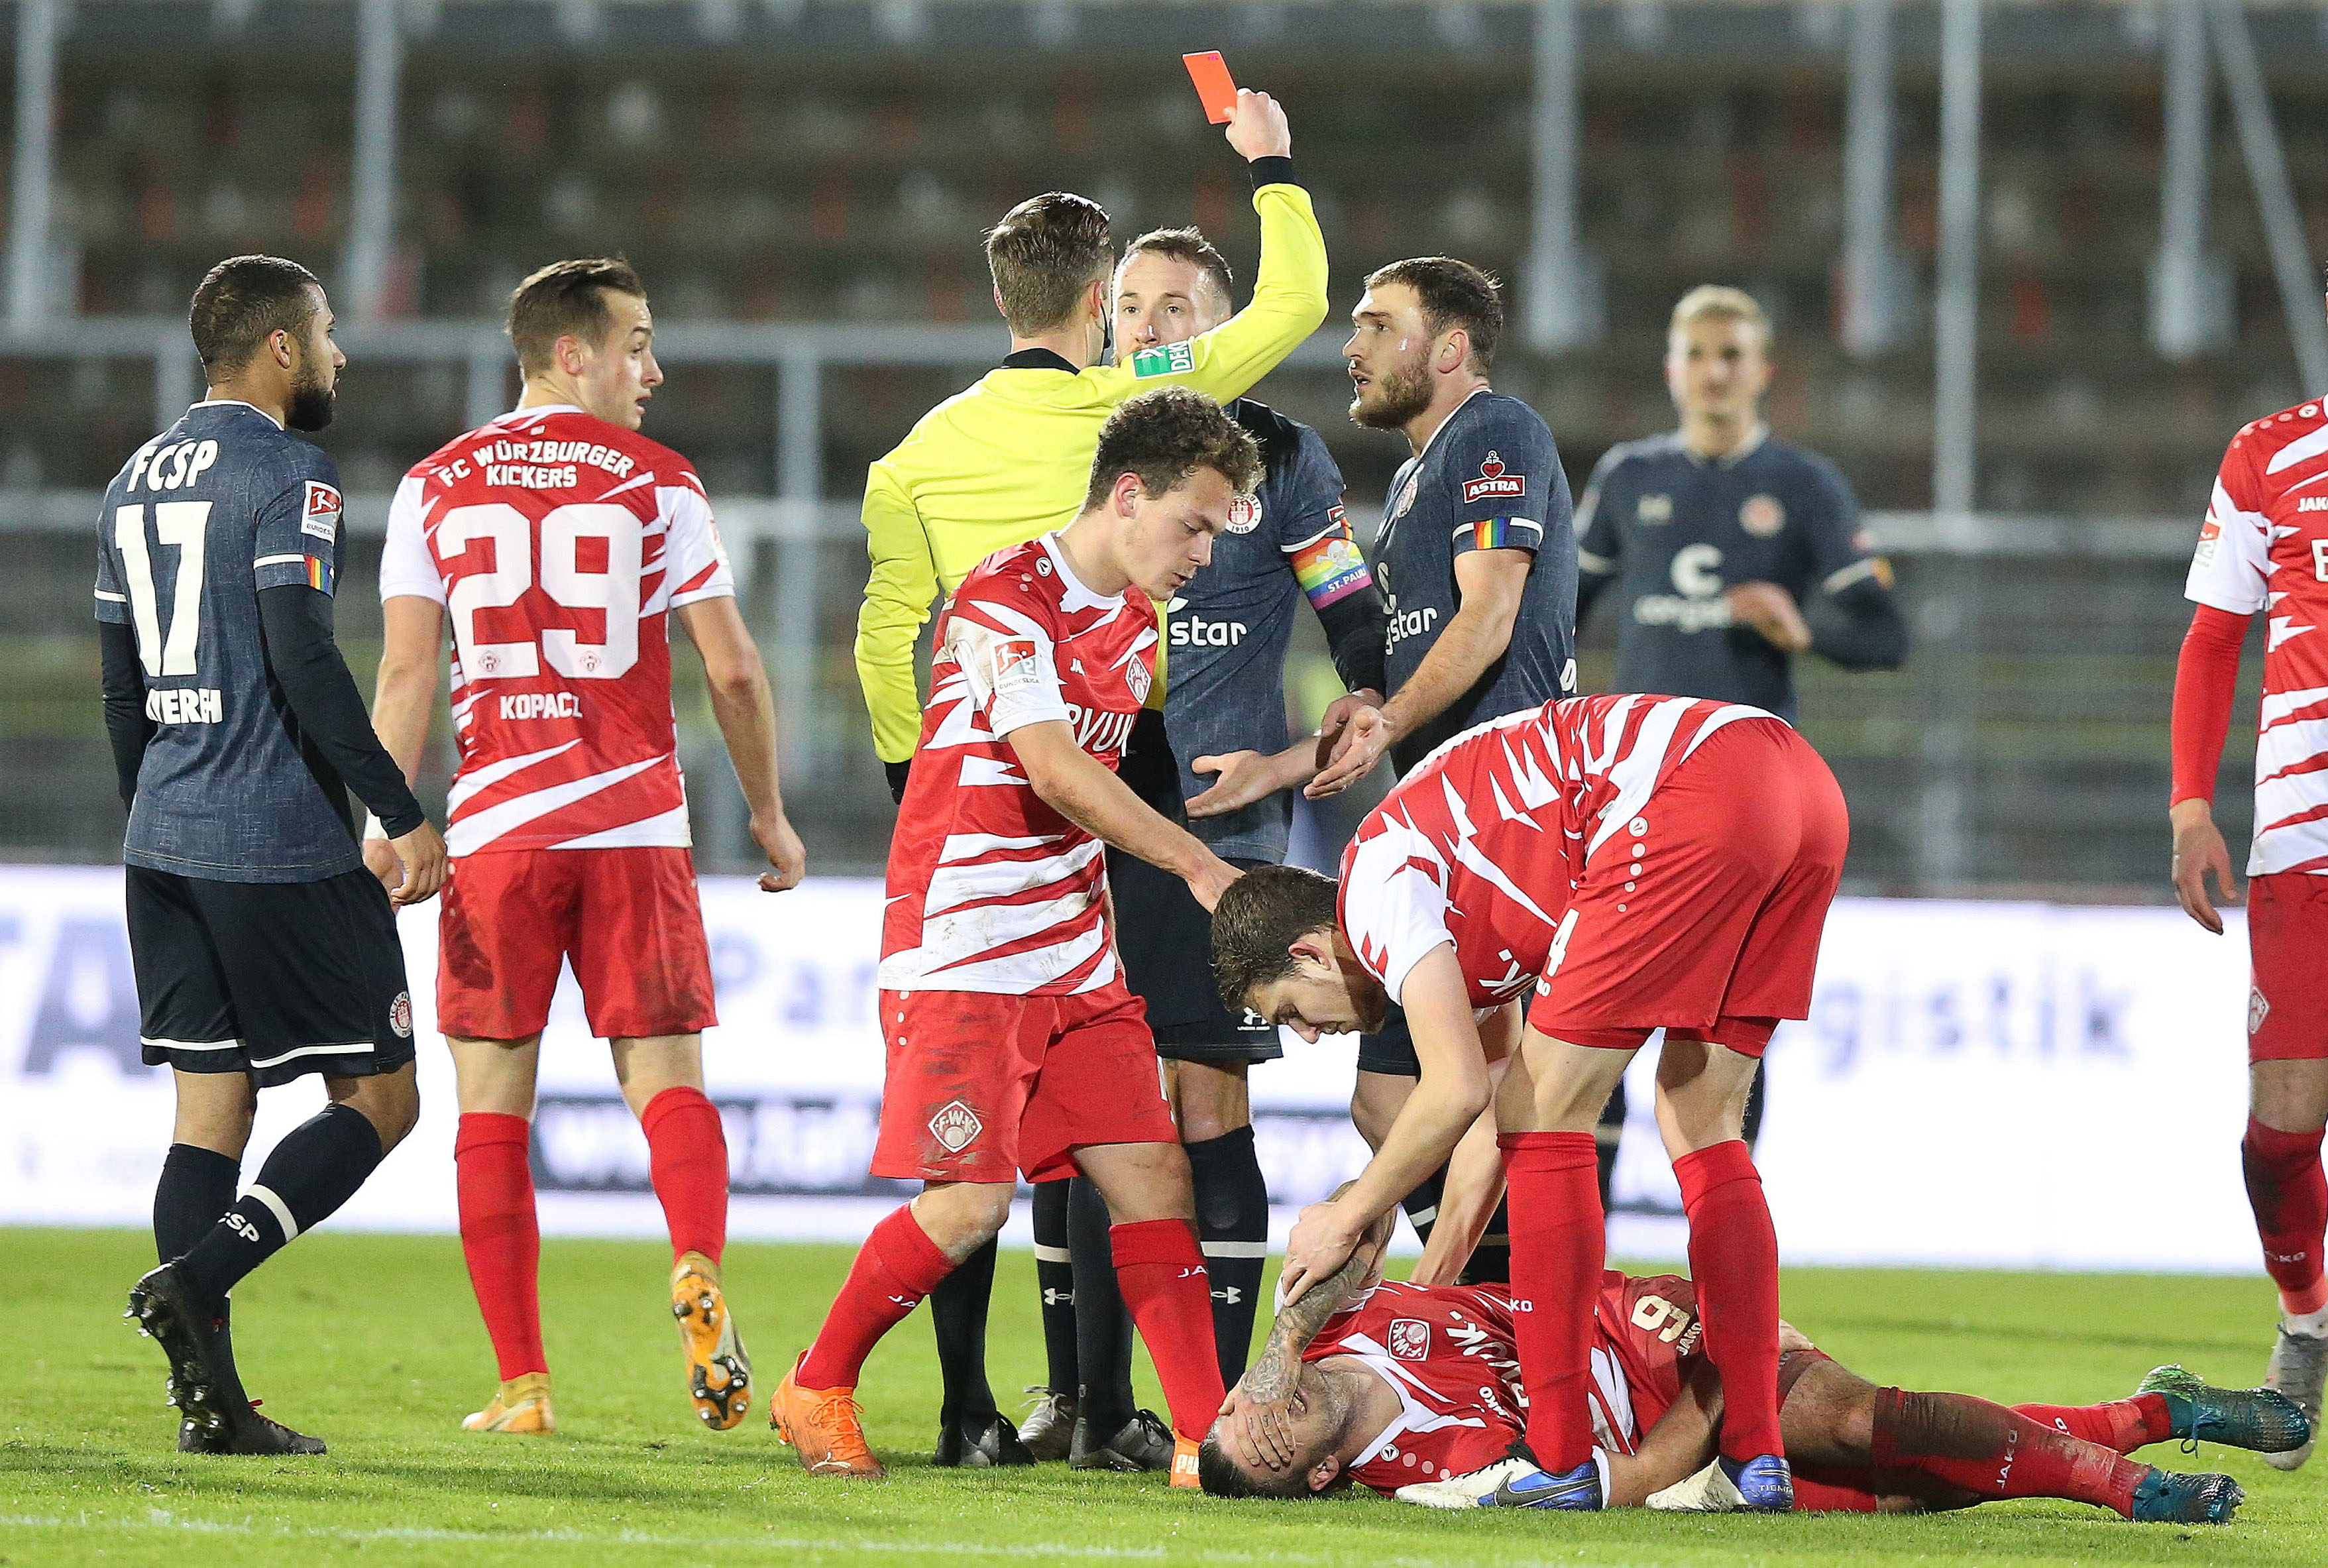 Marvin Knoll received a second yellow card just before half-time, the first sending-off of his professional career.